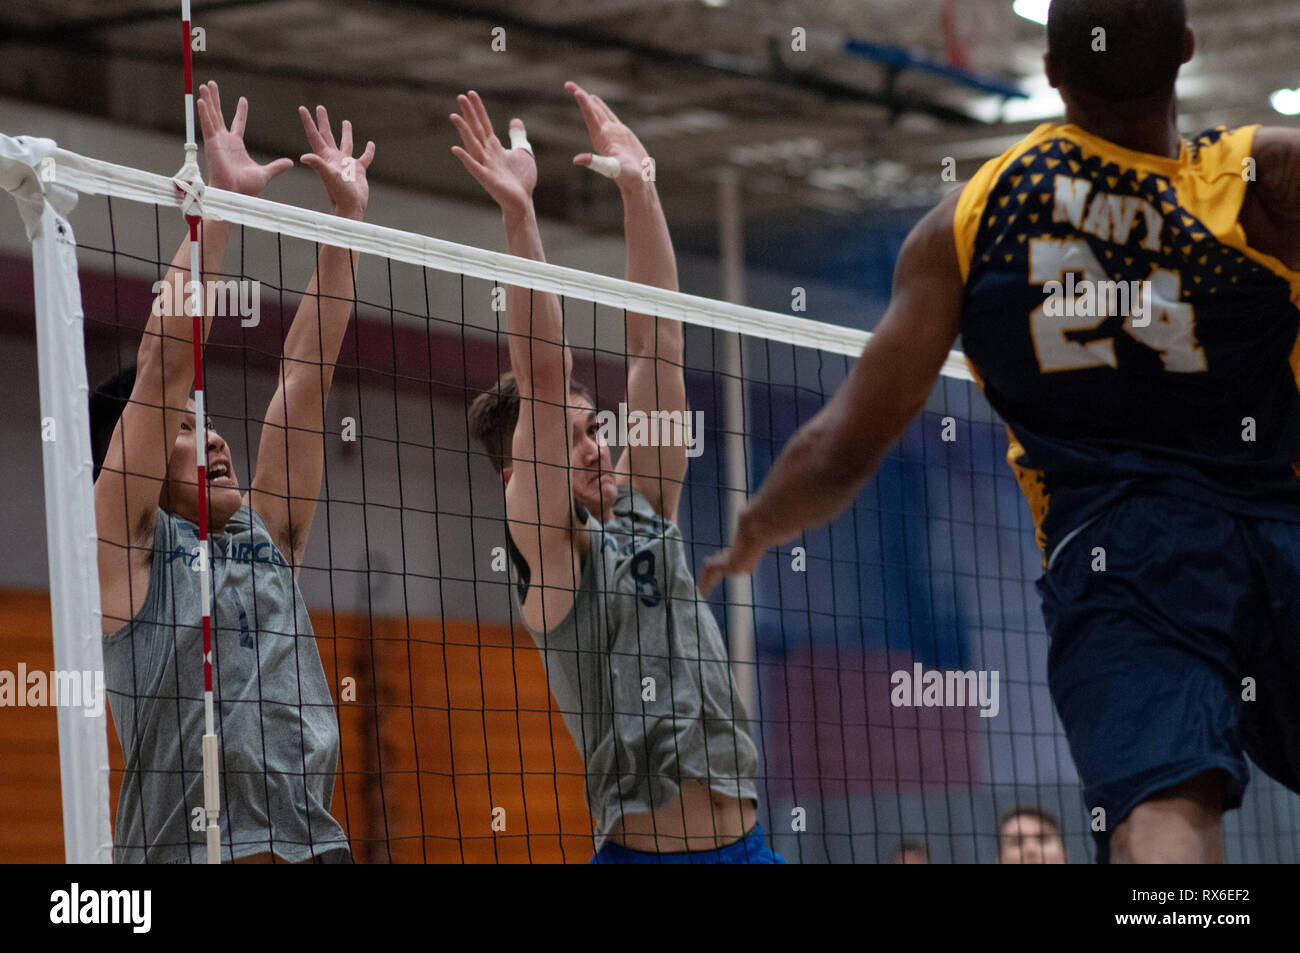 Fort Bragg, North Carolina, USA. 8th Mar, 2019. March 8, 2019 - Fort Bragg, N.C., USA - All-Air Force Men's Volleyball 1st Lt. Kekaiku'imauloa Nu'uhiwa (1) and Senior Airman Anthony Clowers (8) try to block a slam from All-Navy Men's Volleyball Petty Officer 1st Class Sheldon Lucius (24) during the final match between the U.S. Air Force and U.S. Navy at the 2019 Armed Forces Men's Volleyball Championship at Ritz-Epps Gym on Fort Bragg. Air Force defeated Navy, 3-2, winning gold in the three-day round-robin tournament. The Armed Forces Men's and Women's Volleyball Championships are held annu Stock Photo